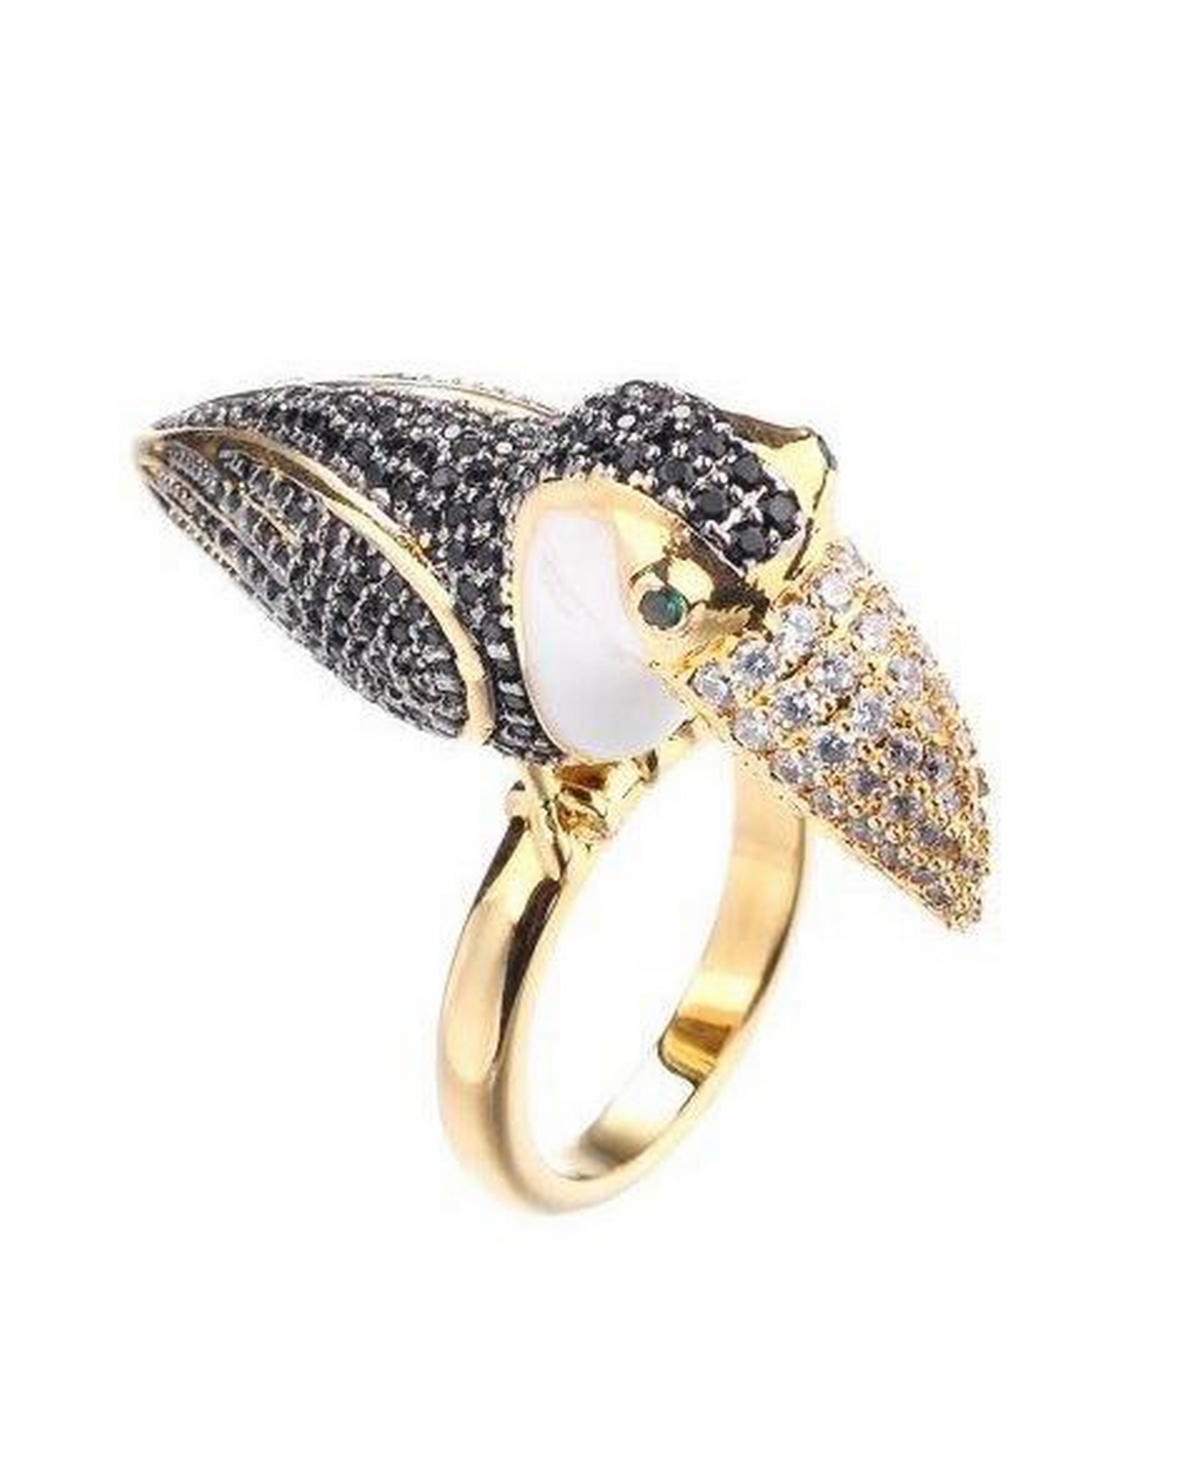 Tucan Ring With Cubic Zirconia Stones - Gold